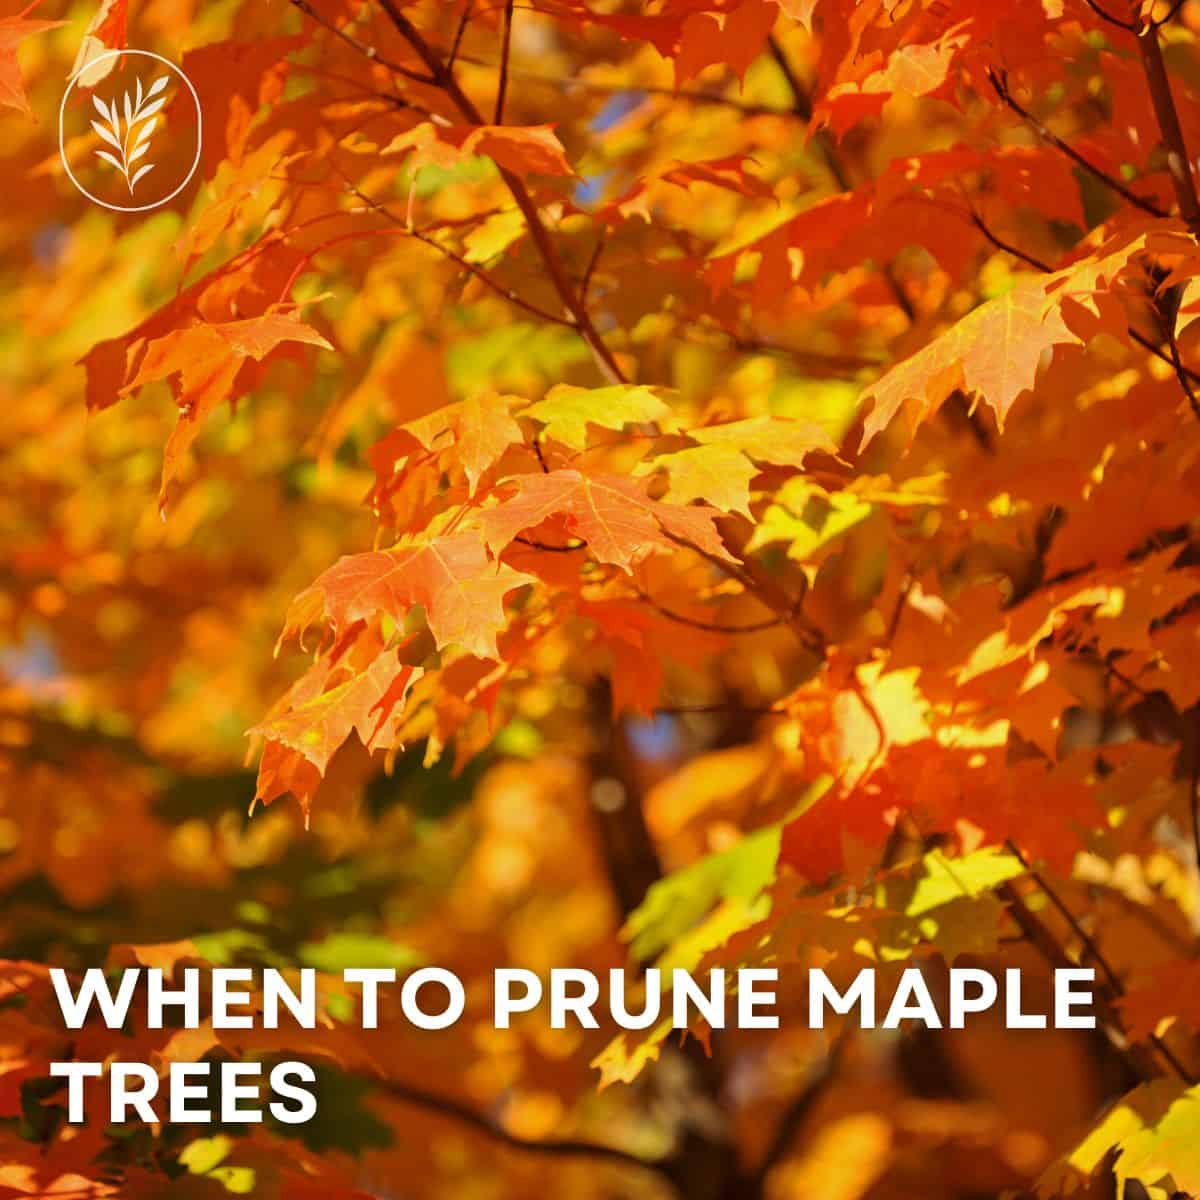 When to prune maple trees via @home4theharvest